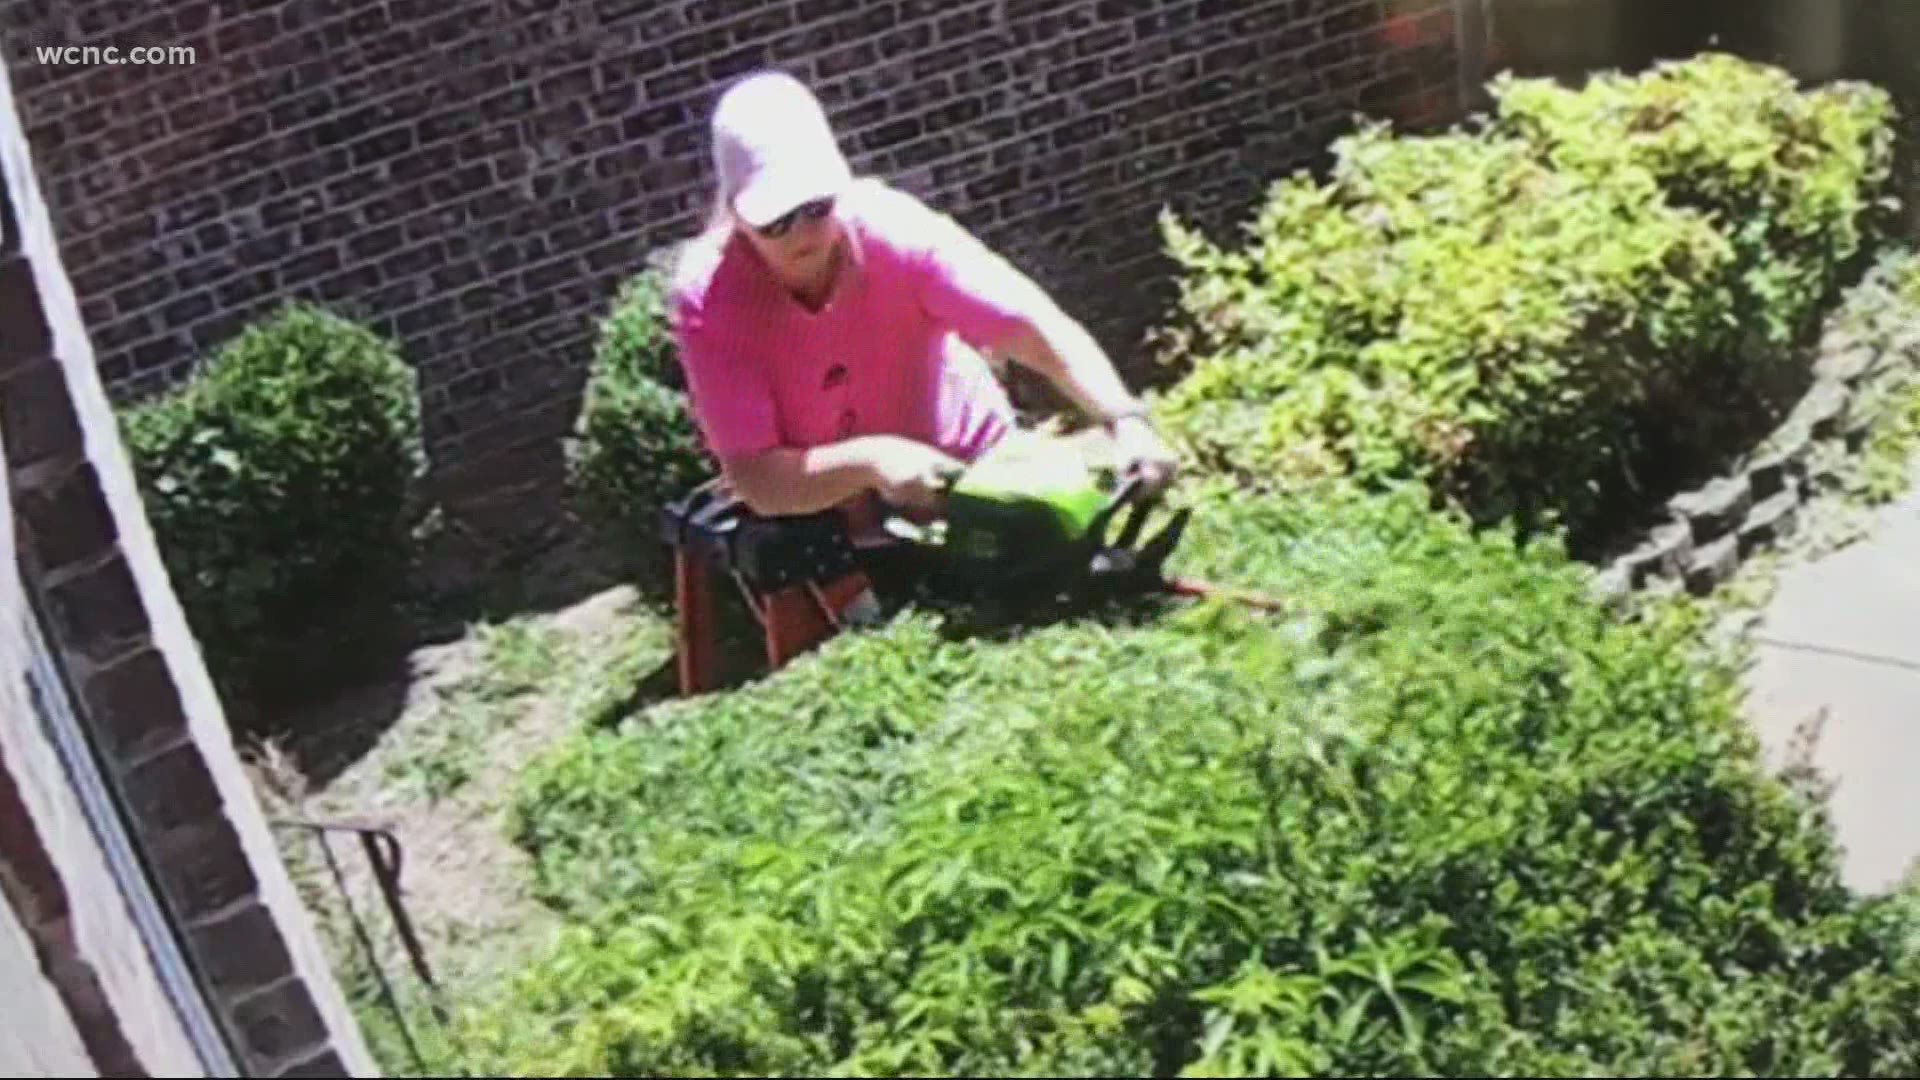 A local homeowner trimming hedges was attacked by a black snake. The encounter was caught on camera.